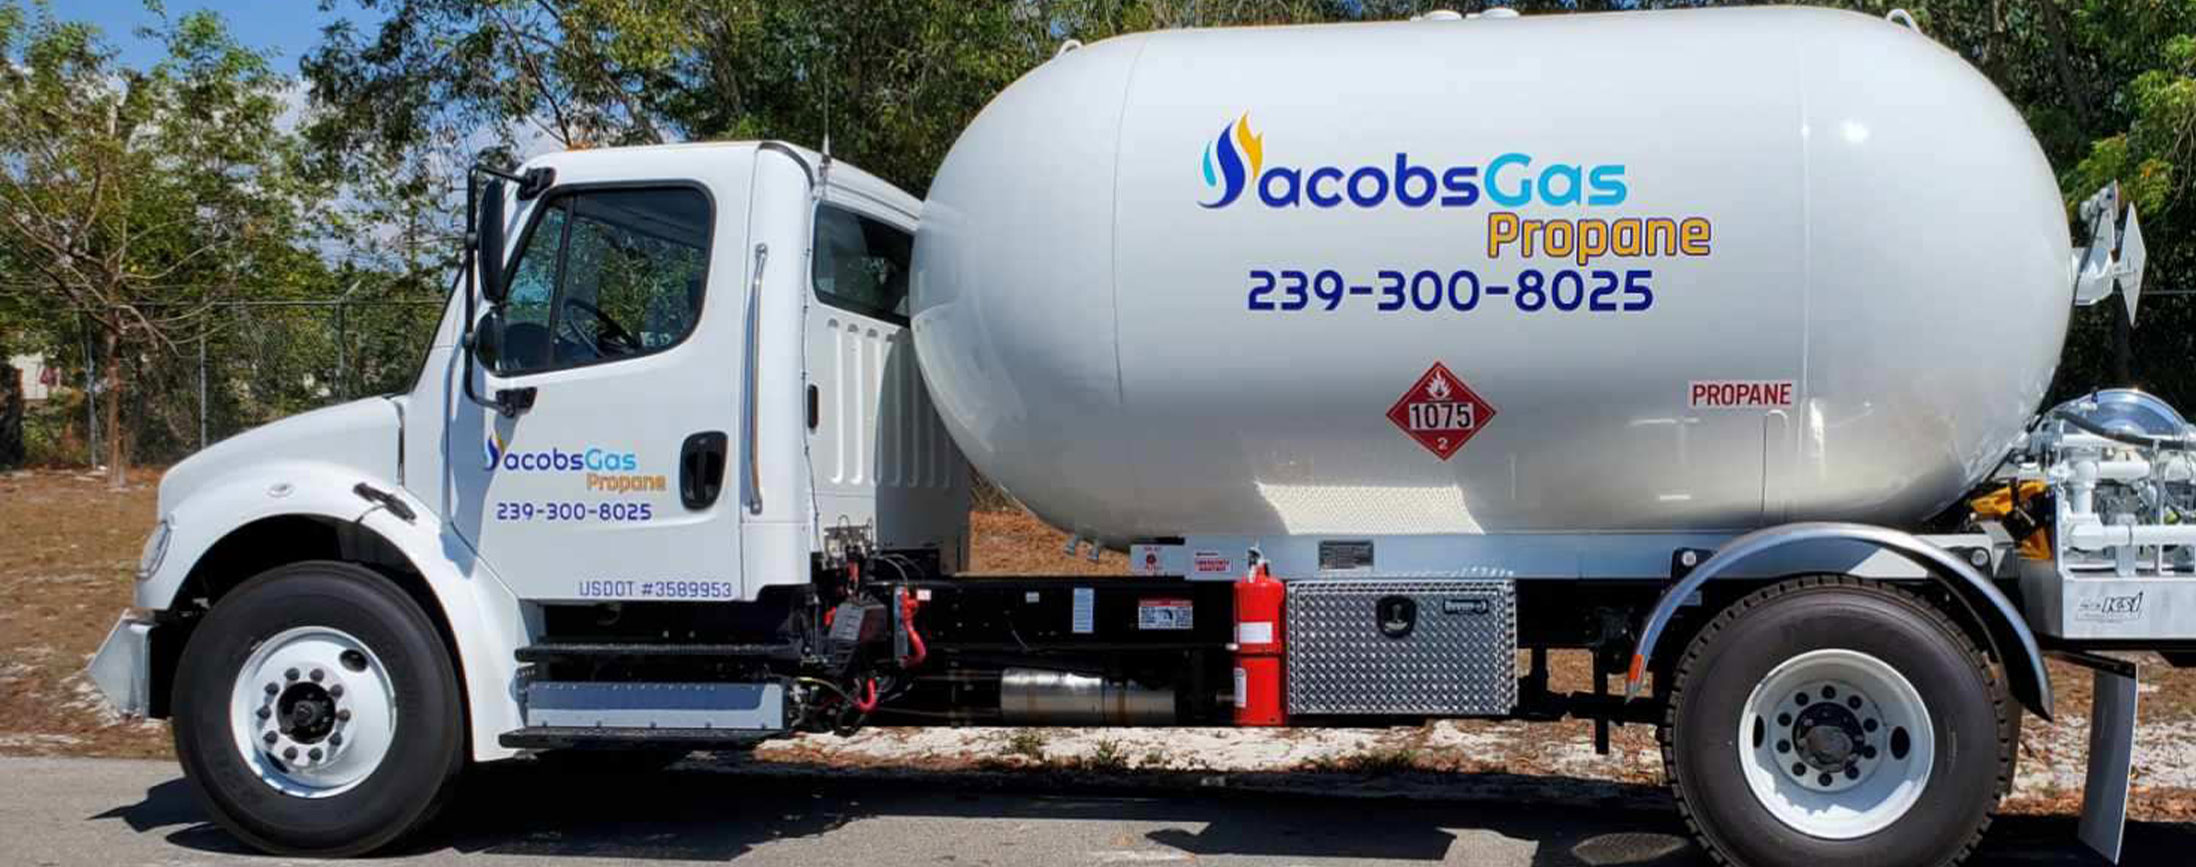 Propane Delivery Truck | Jacobs Total Gas Services - Expert Propane & Natural Gas Installation Services in Naples, Marco Island, Bonita Springs & Estero